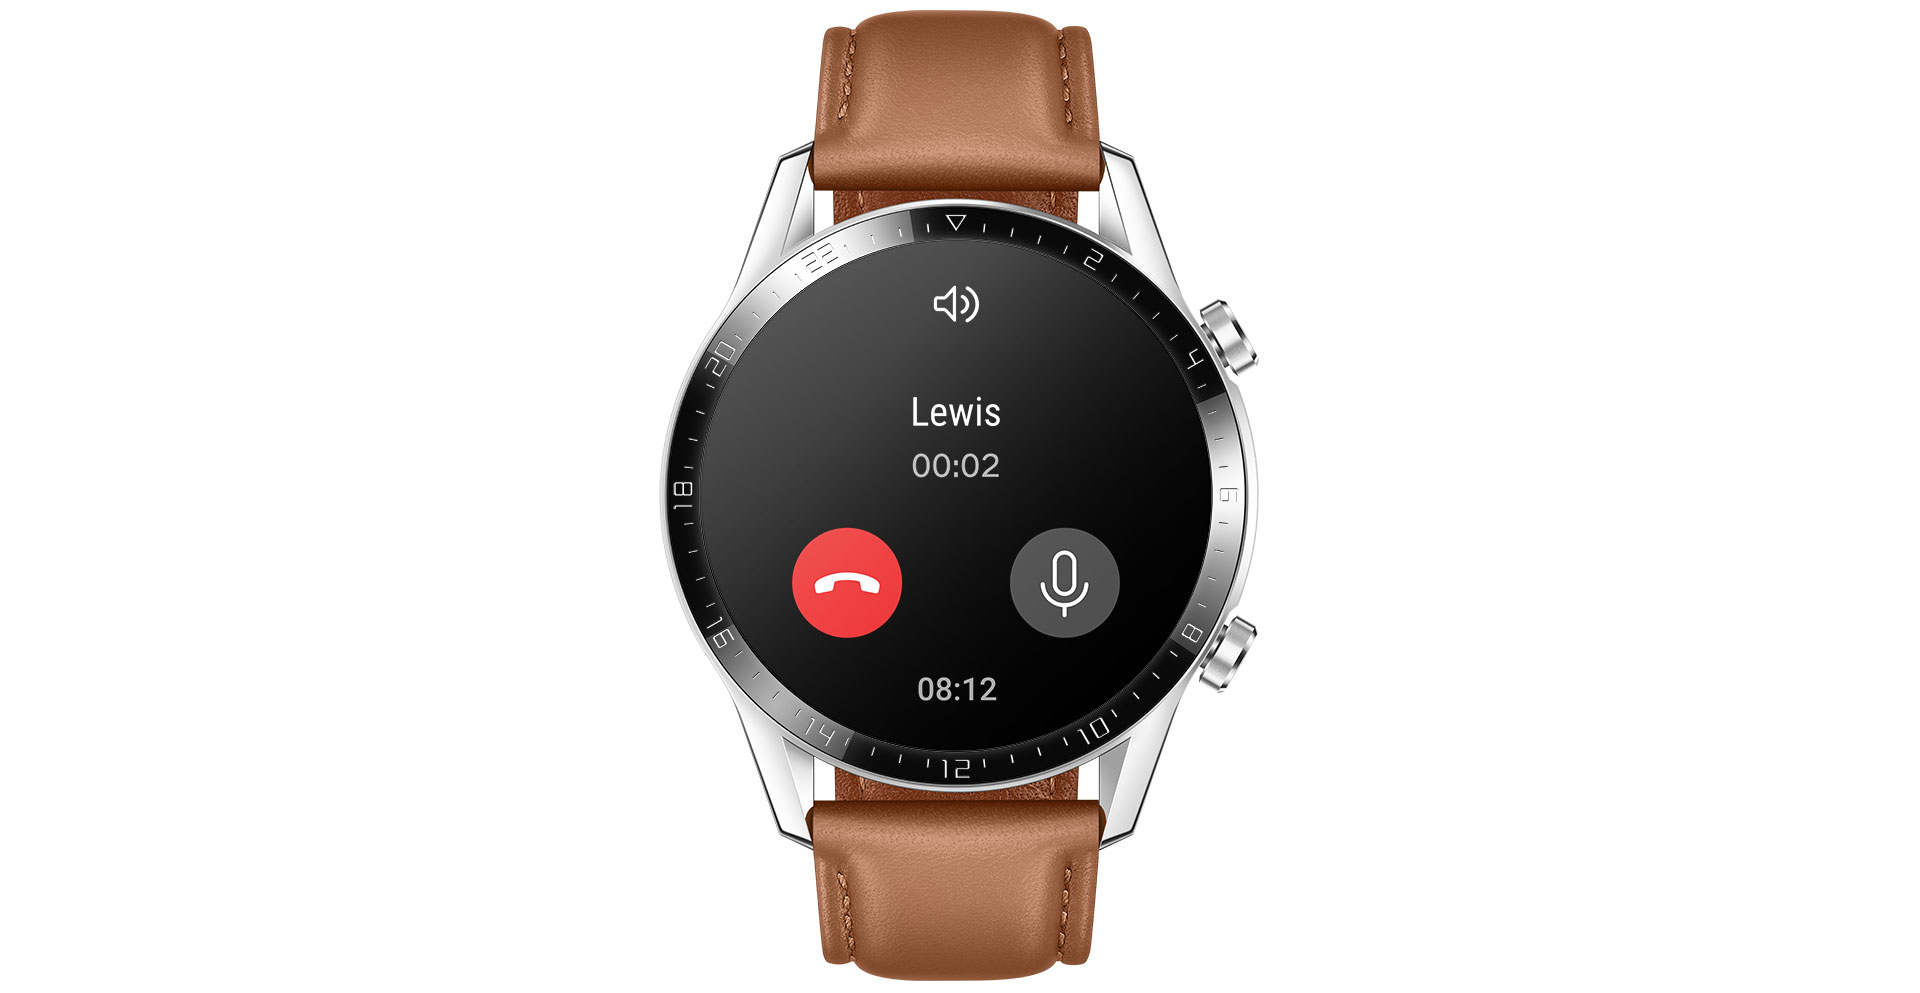 huawei watch gt 2 design and disaply